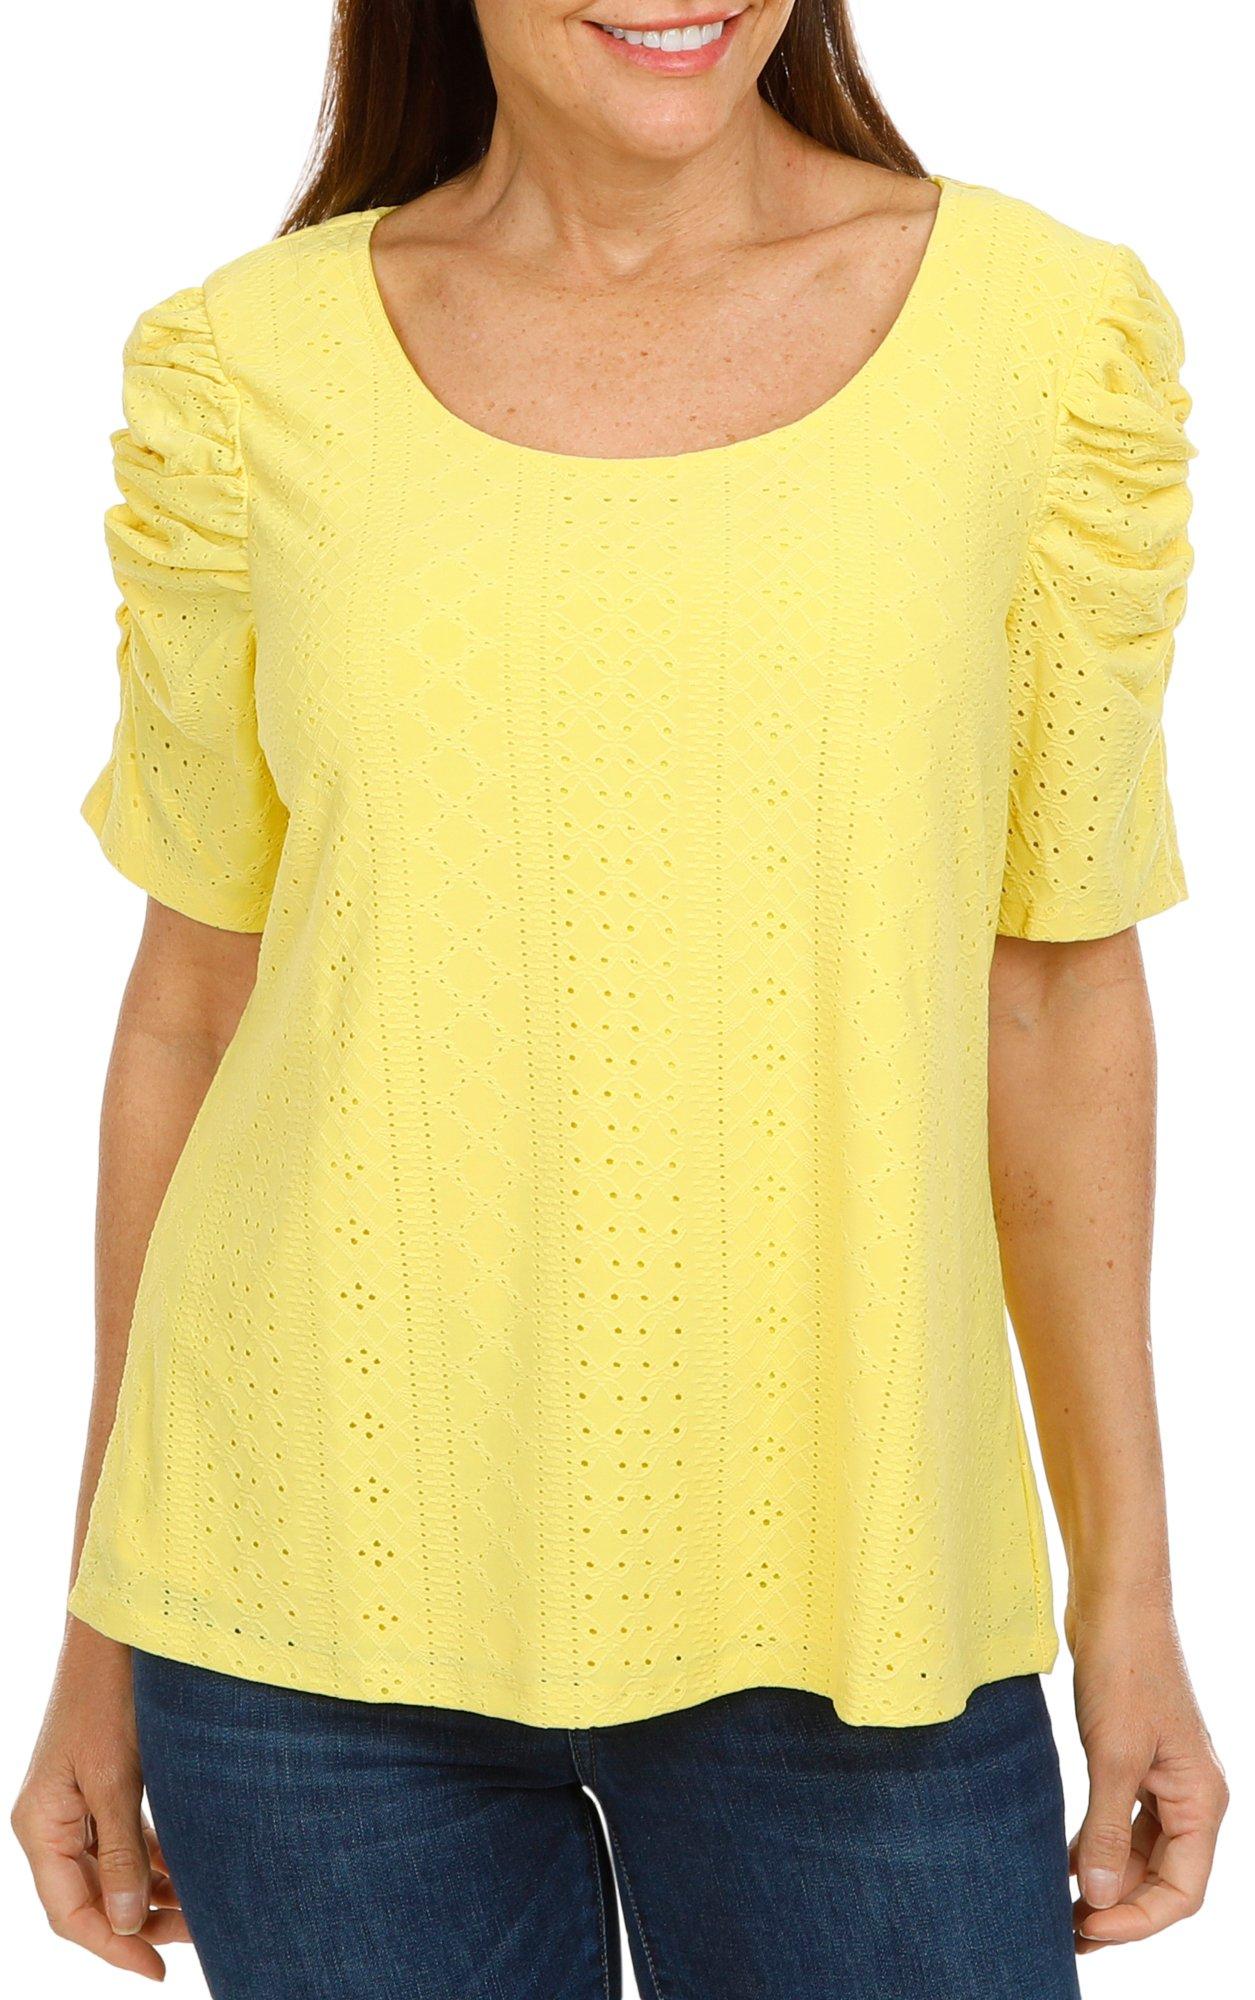 Women's Solid Rushed Eyelet Top- Yellow